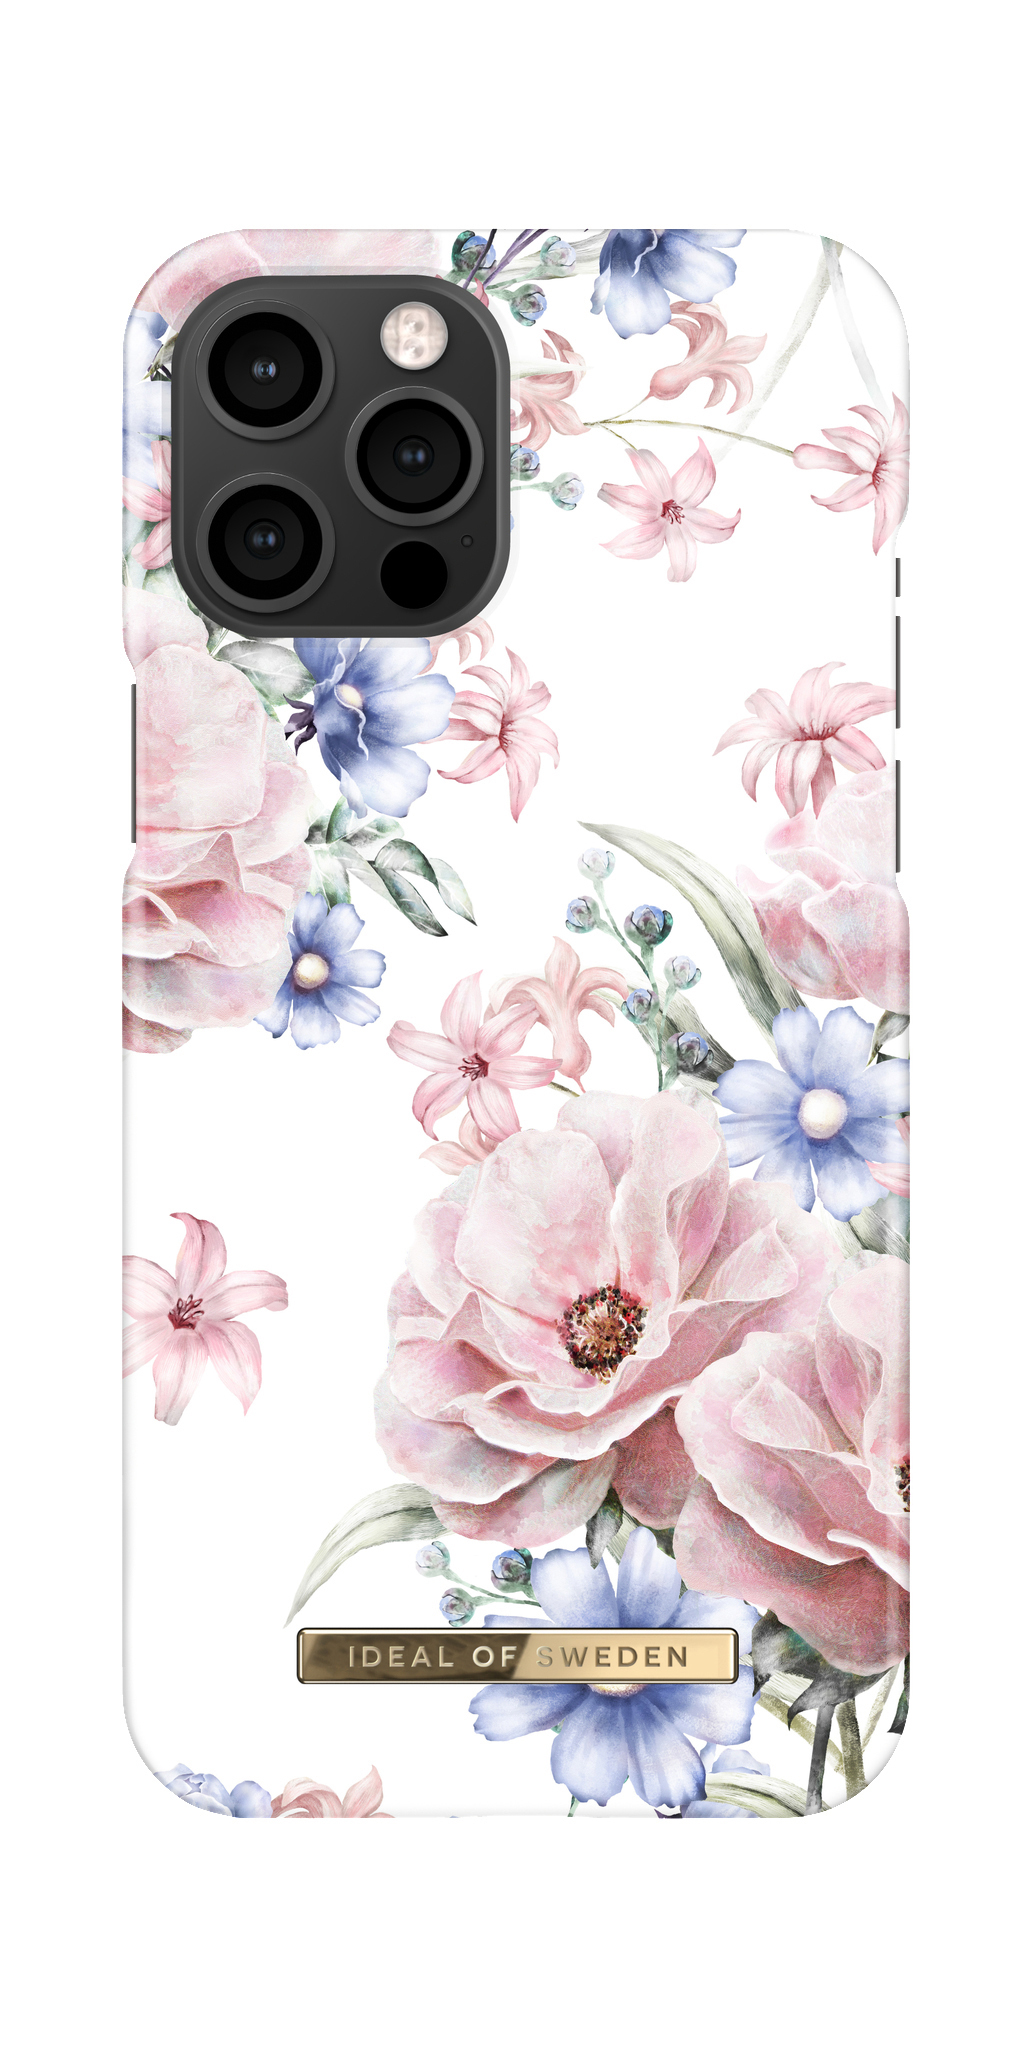 IDEAL 12 OF Romance Case, Pro iPhone SWEDEN Backcover, Max, Apple, Floral Fashion